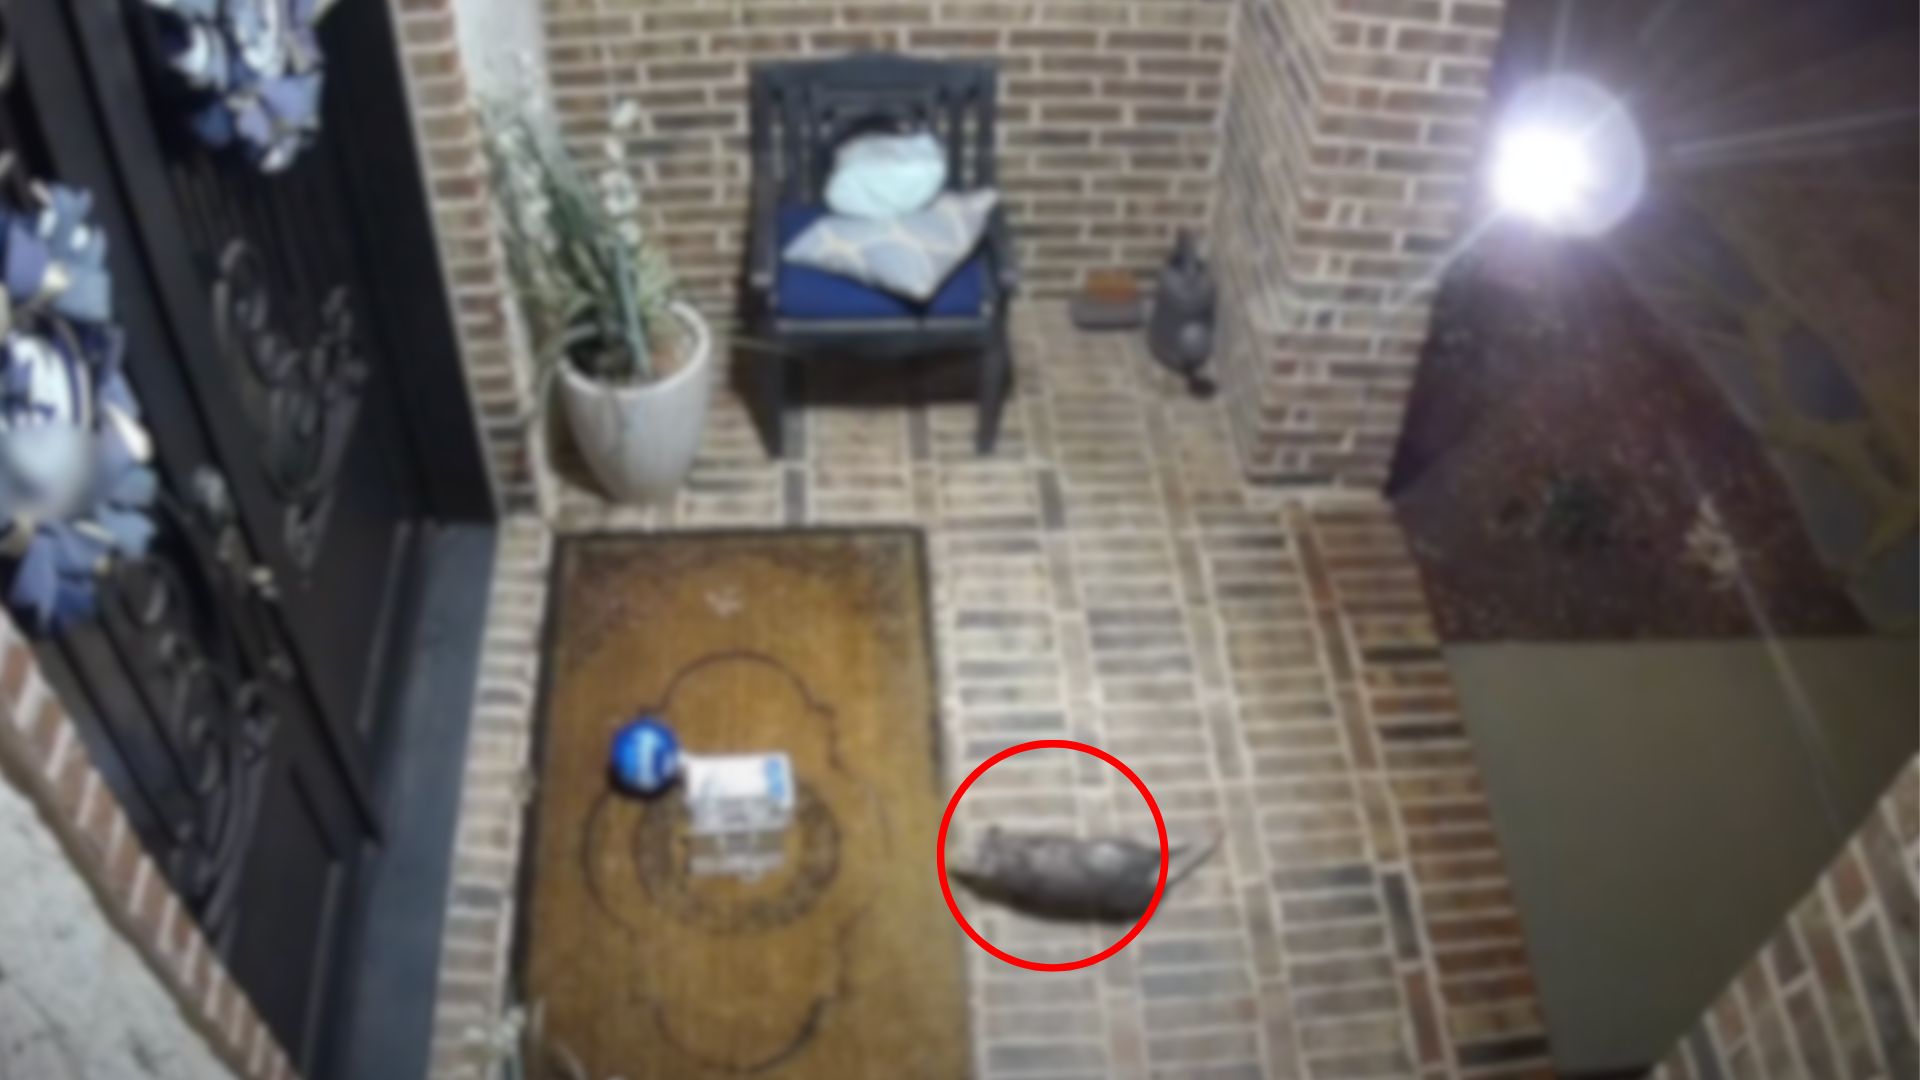 Birthday Gift Mysteriously Vanished From Doorway But The Security Camera Revealed It All